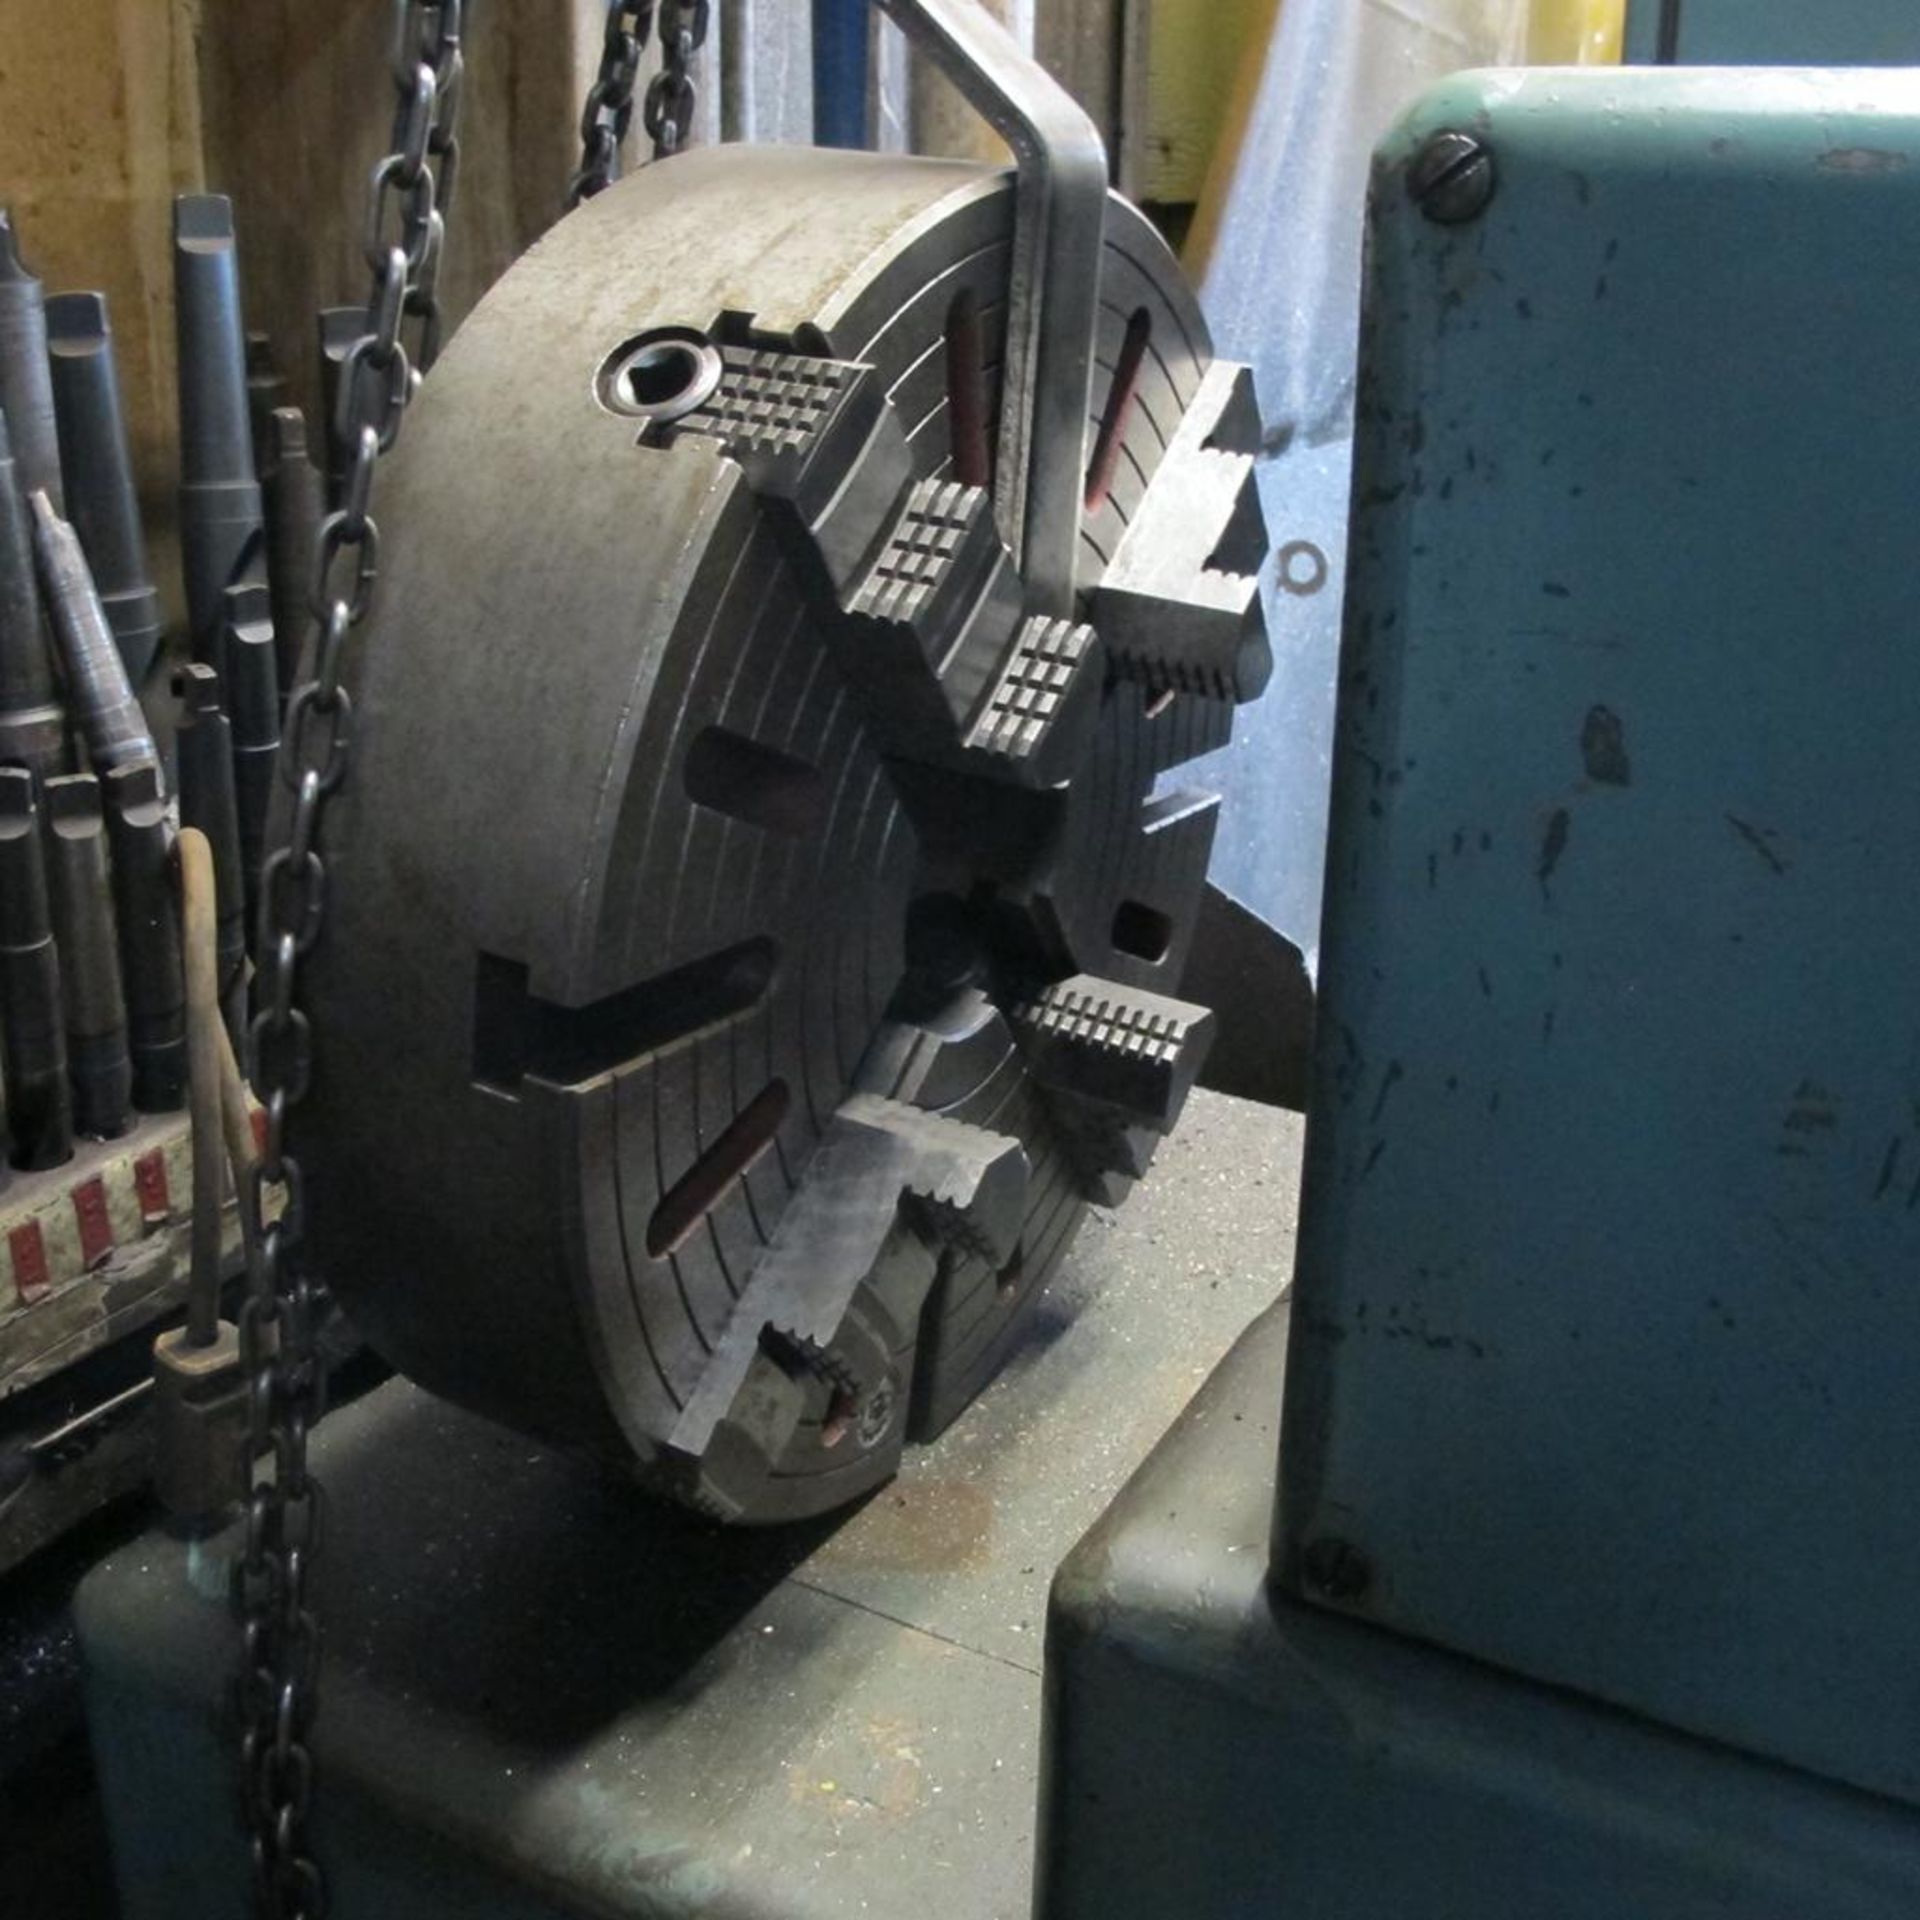 TOS LATHE MODEL SN 63 C, 28" X 120", 12" 3 JAW CHUCK, SPARE 20" 4 JAW CHUCK, 3" SPINDLE BORE, TOOL H - Image 9 of 10